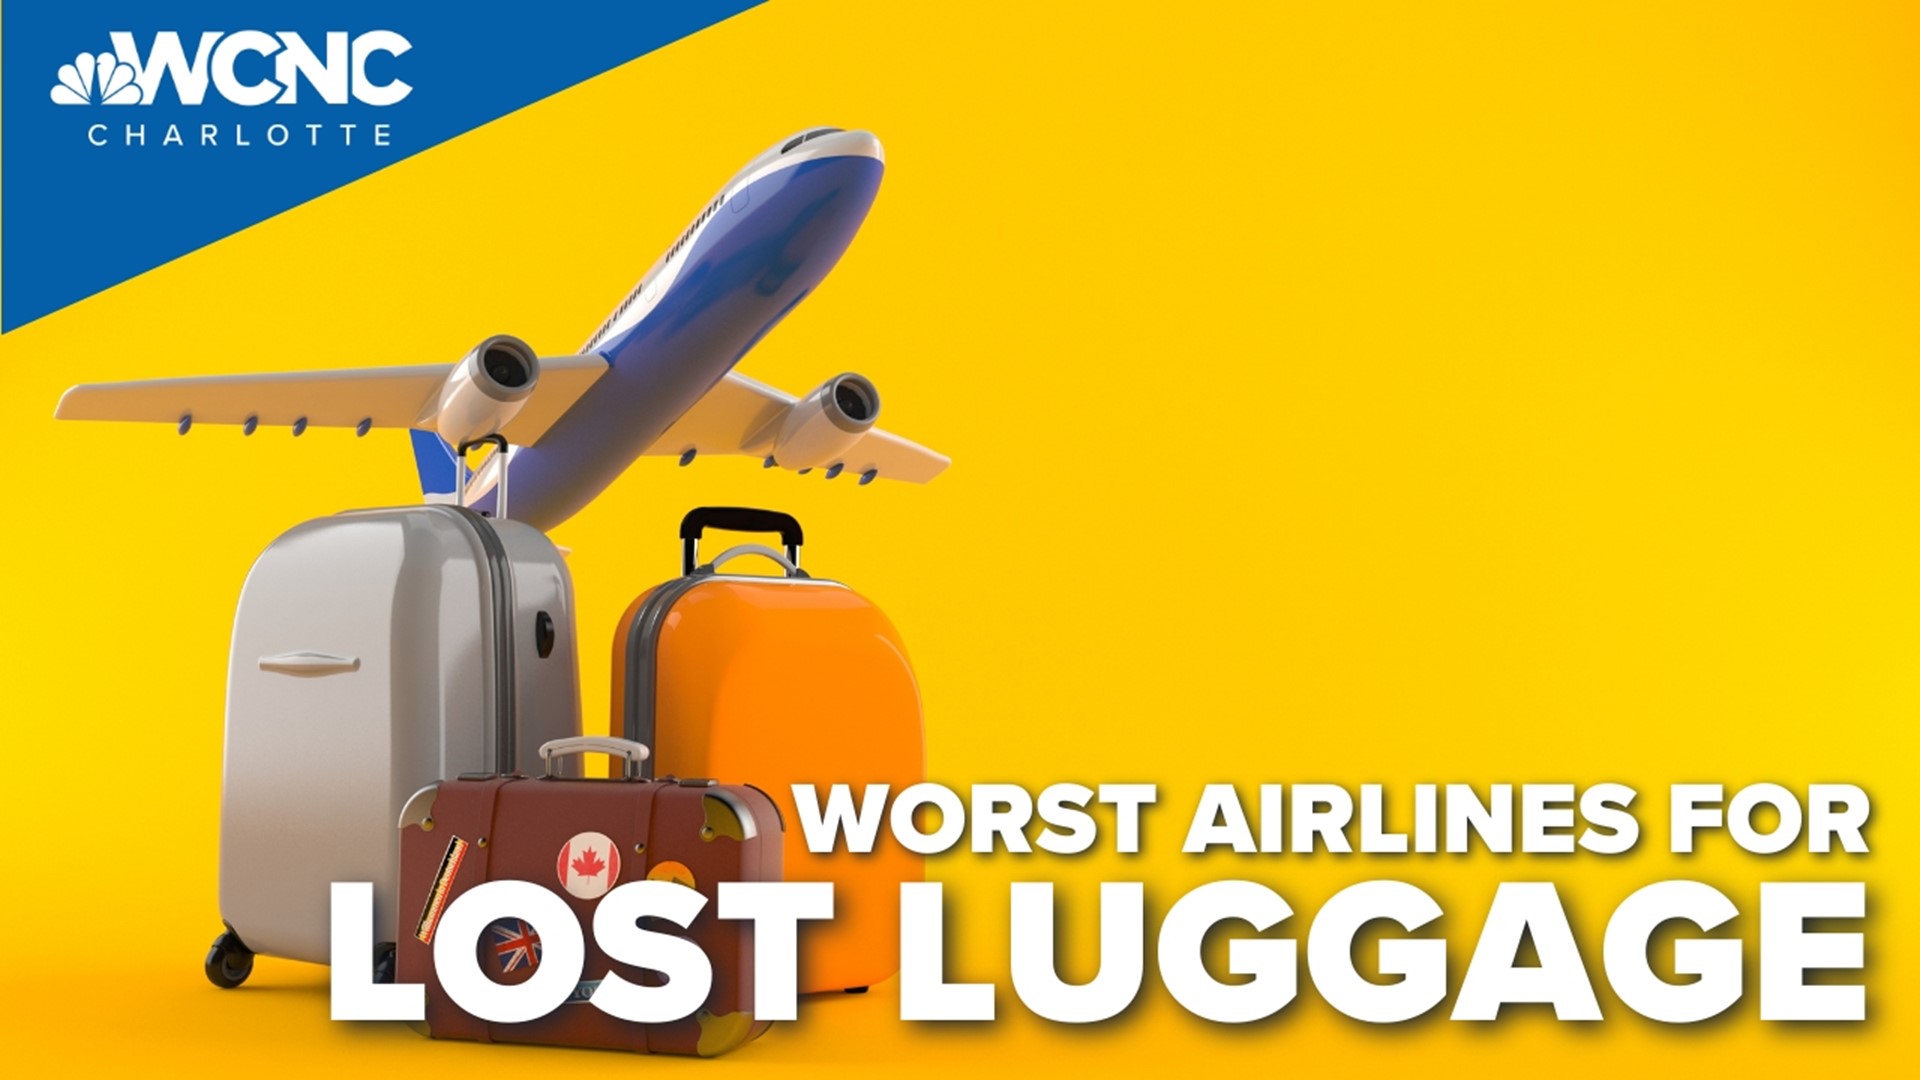 Summer trips are in full swing, and nothing can put a damper on a trip quite like losing your luggage.